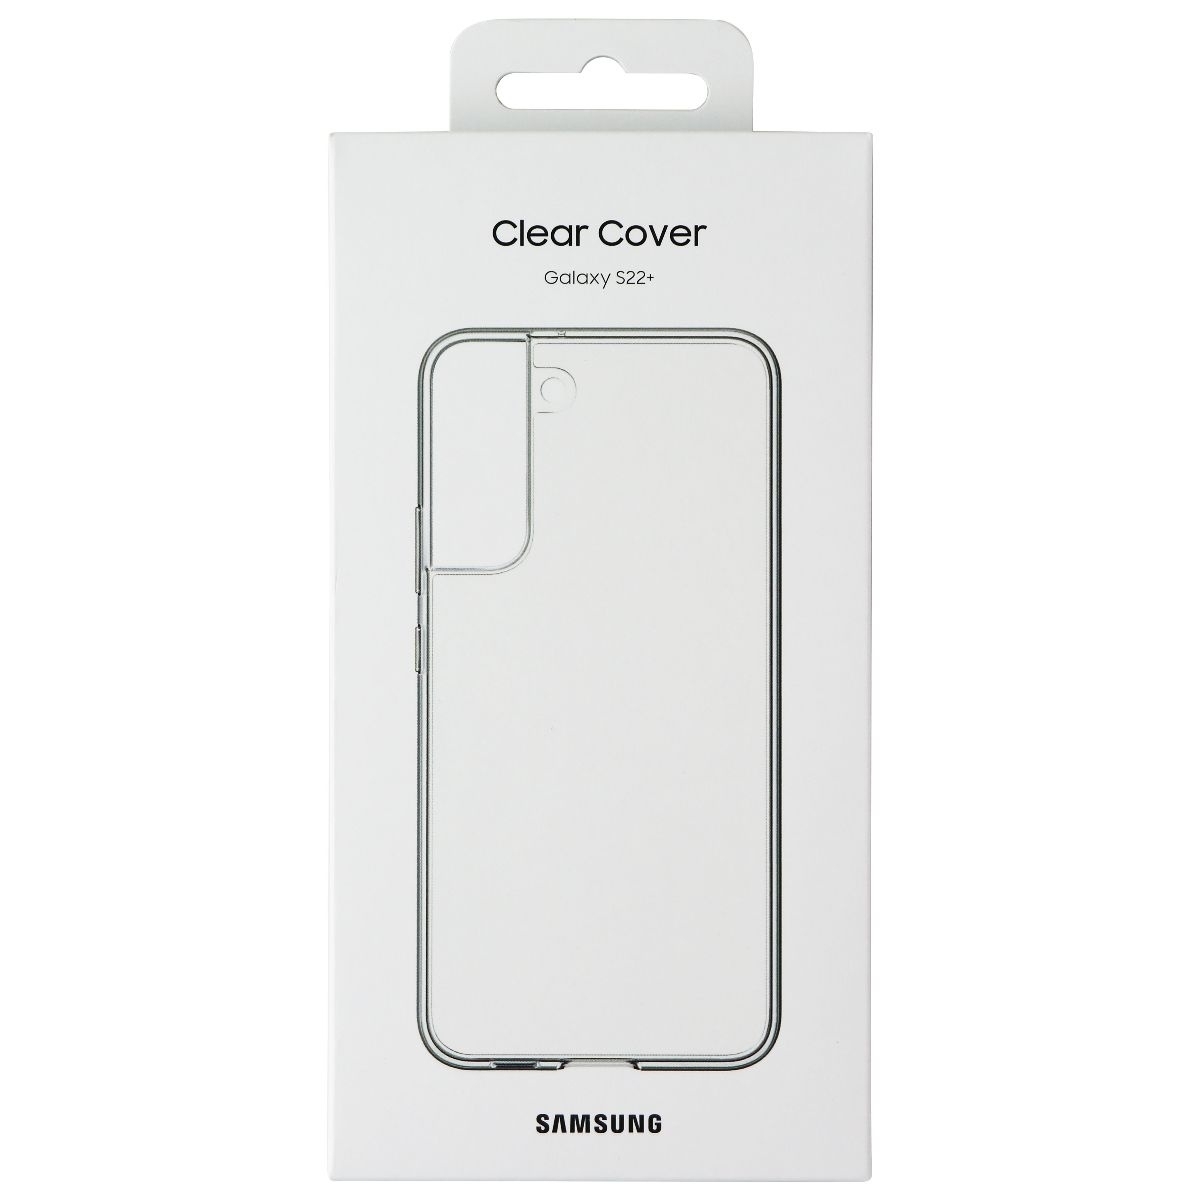 Samsung Official Clear Cover For Samsung Galaxy (S22+) Smartphones - Clear